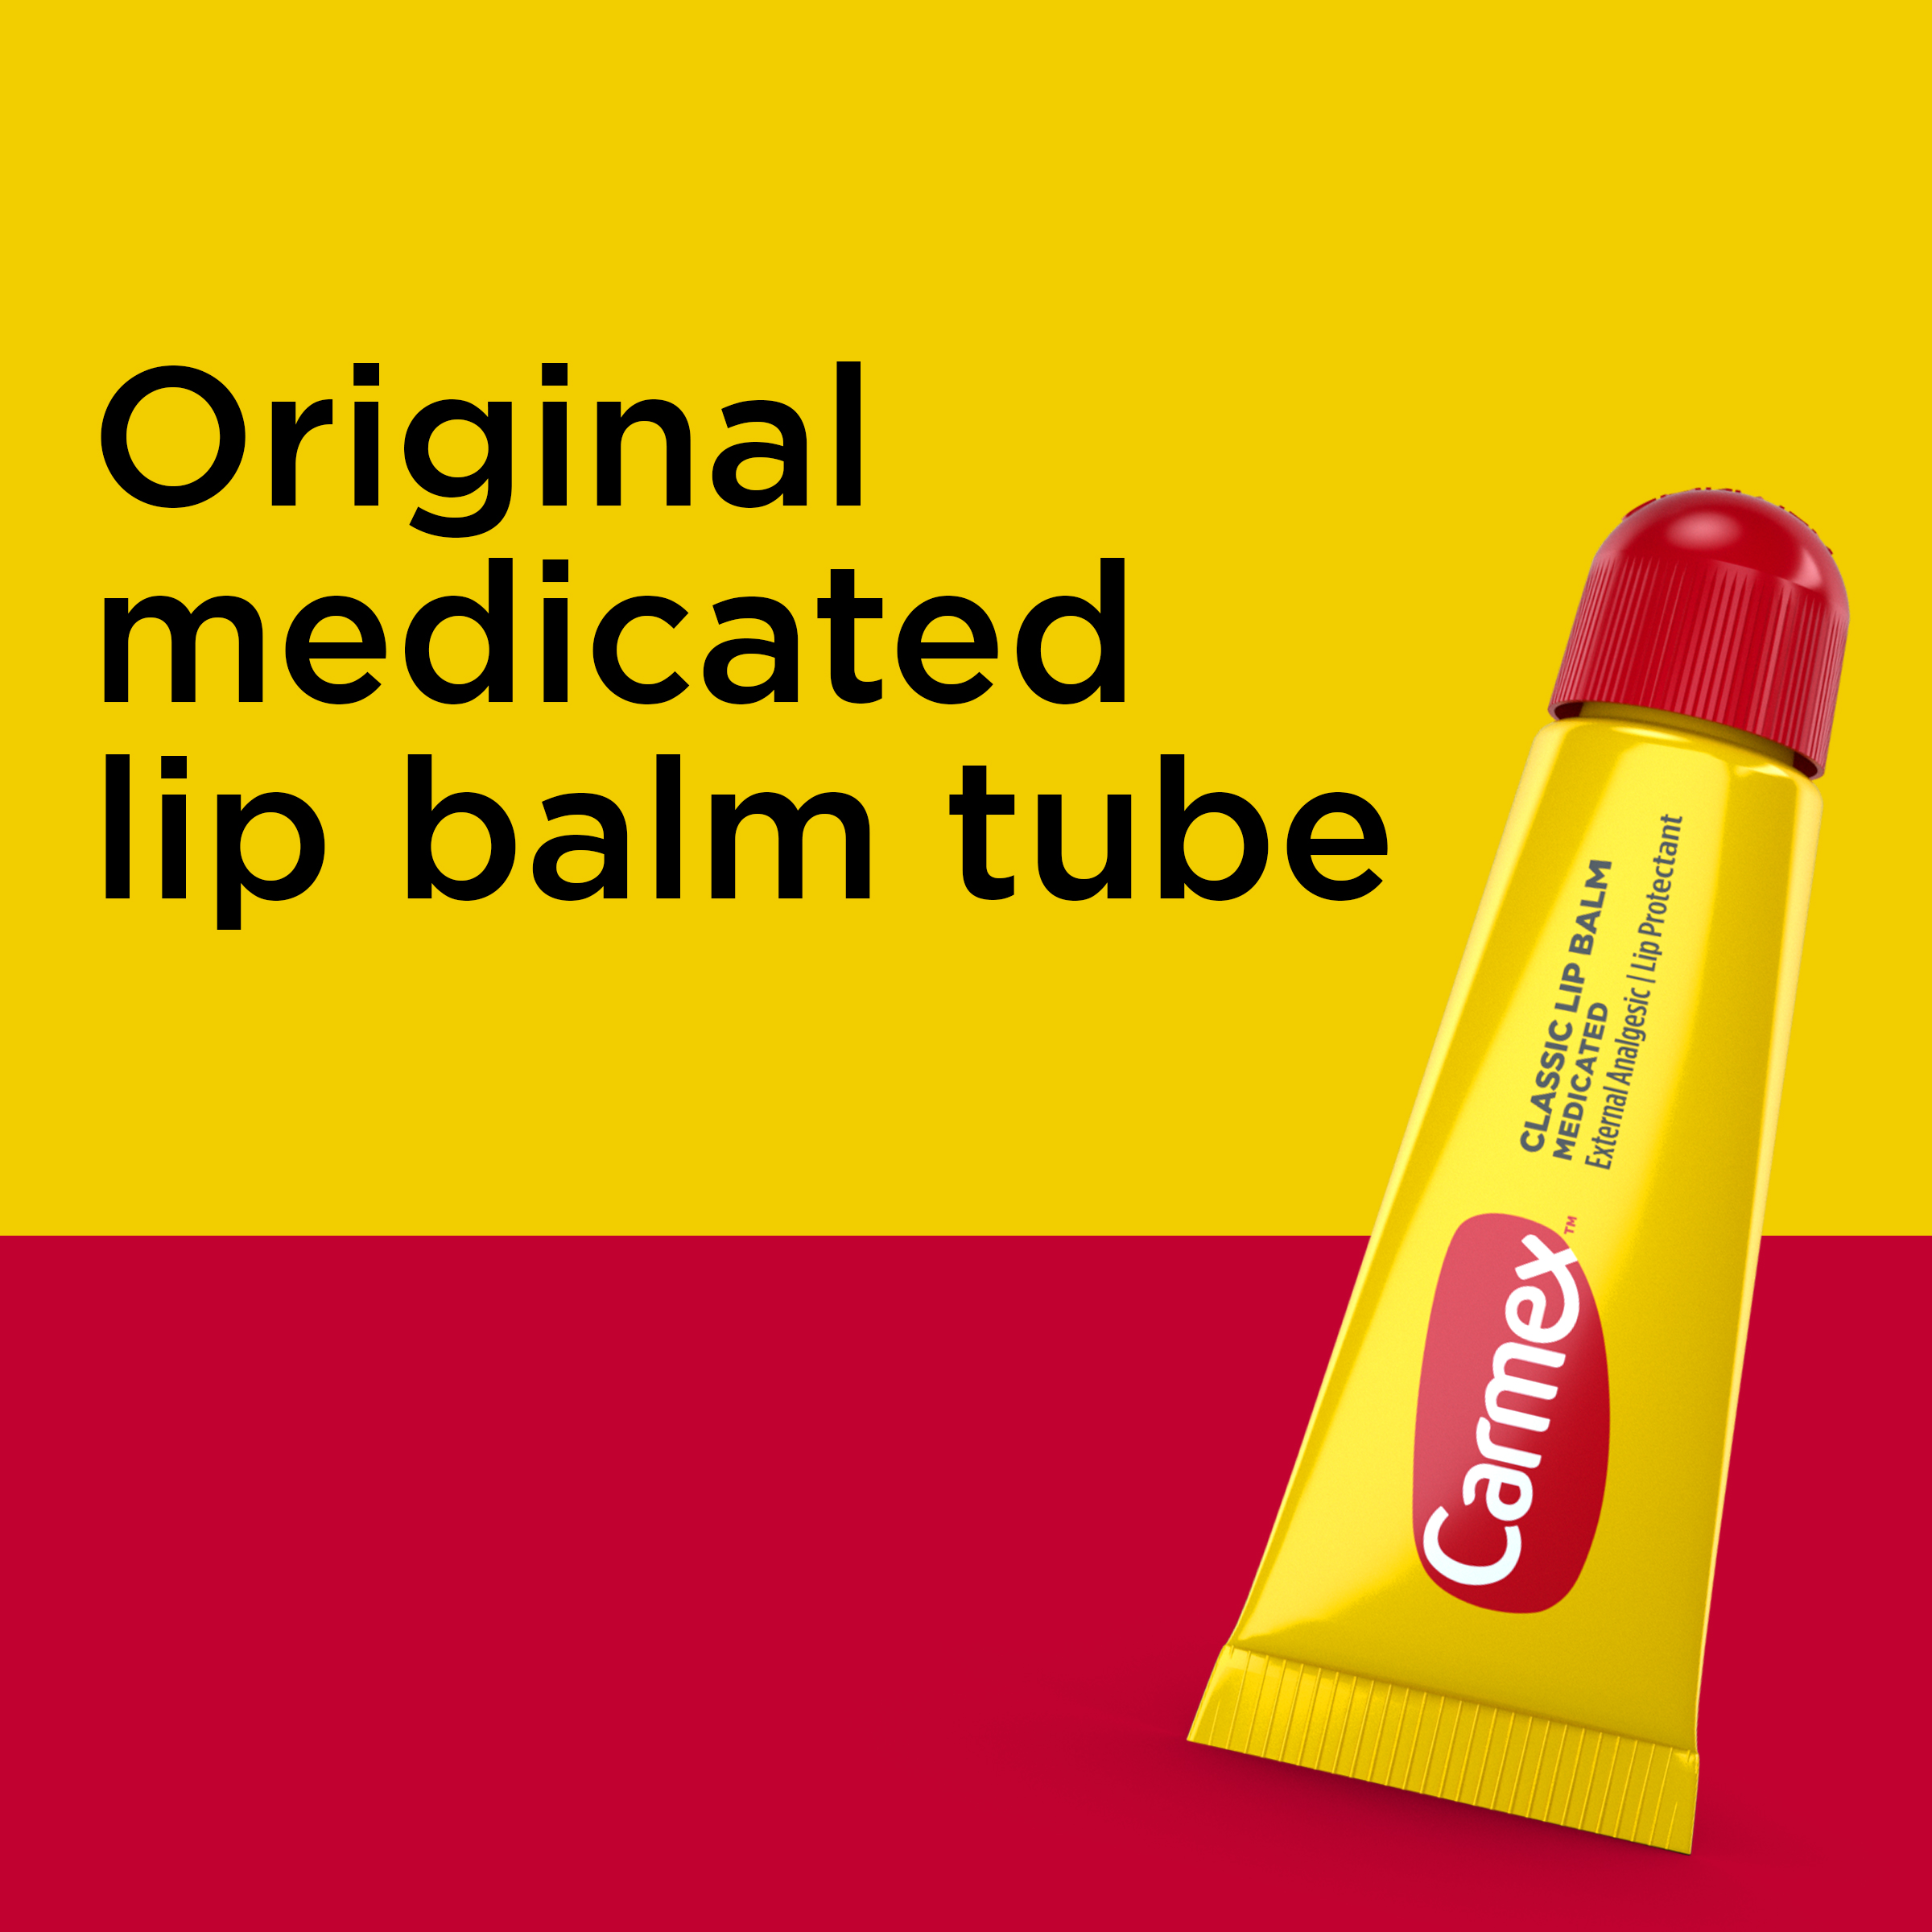 Carmex Classic Medicated Lip Balm Tubes, Lip Moisturizer, 3 Count (1 Pack of 3) - image 6 of 12